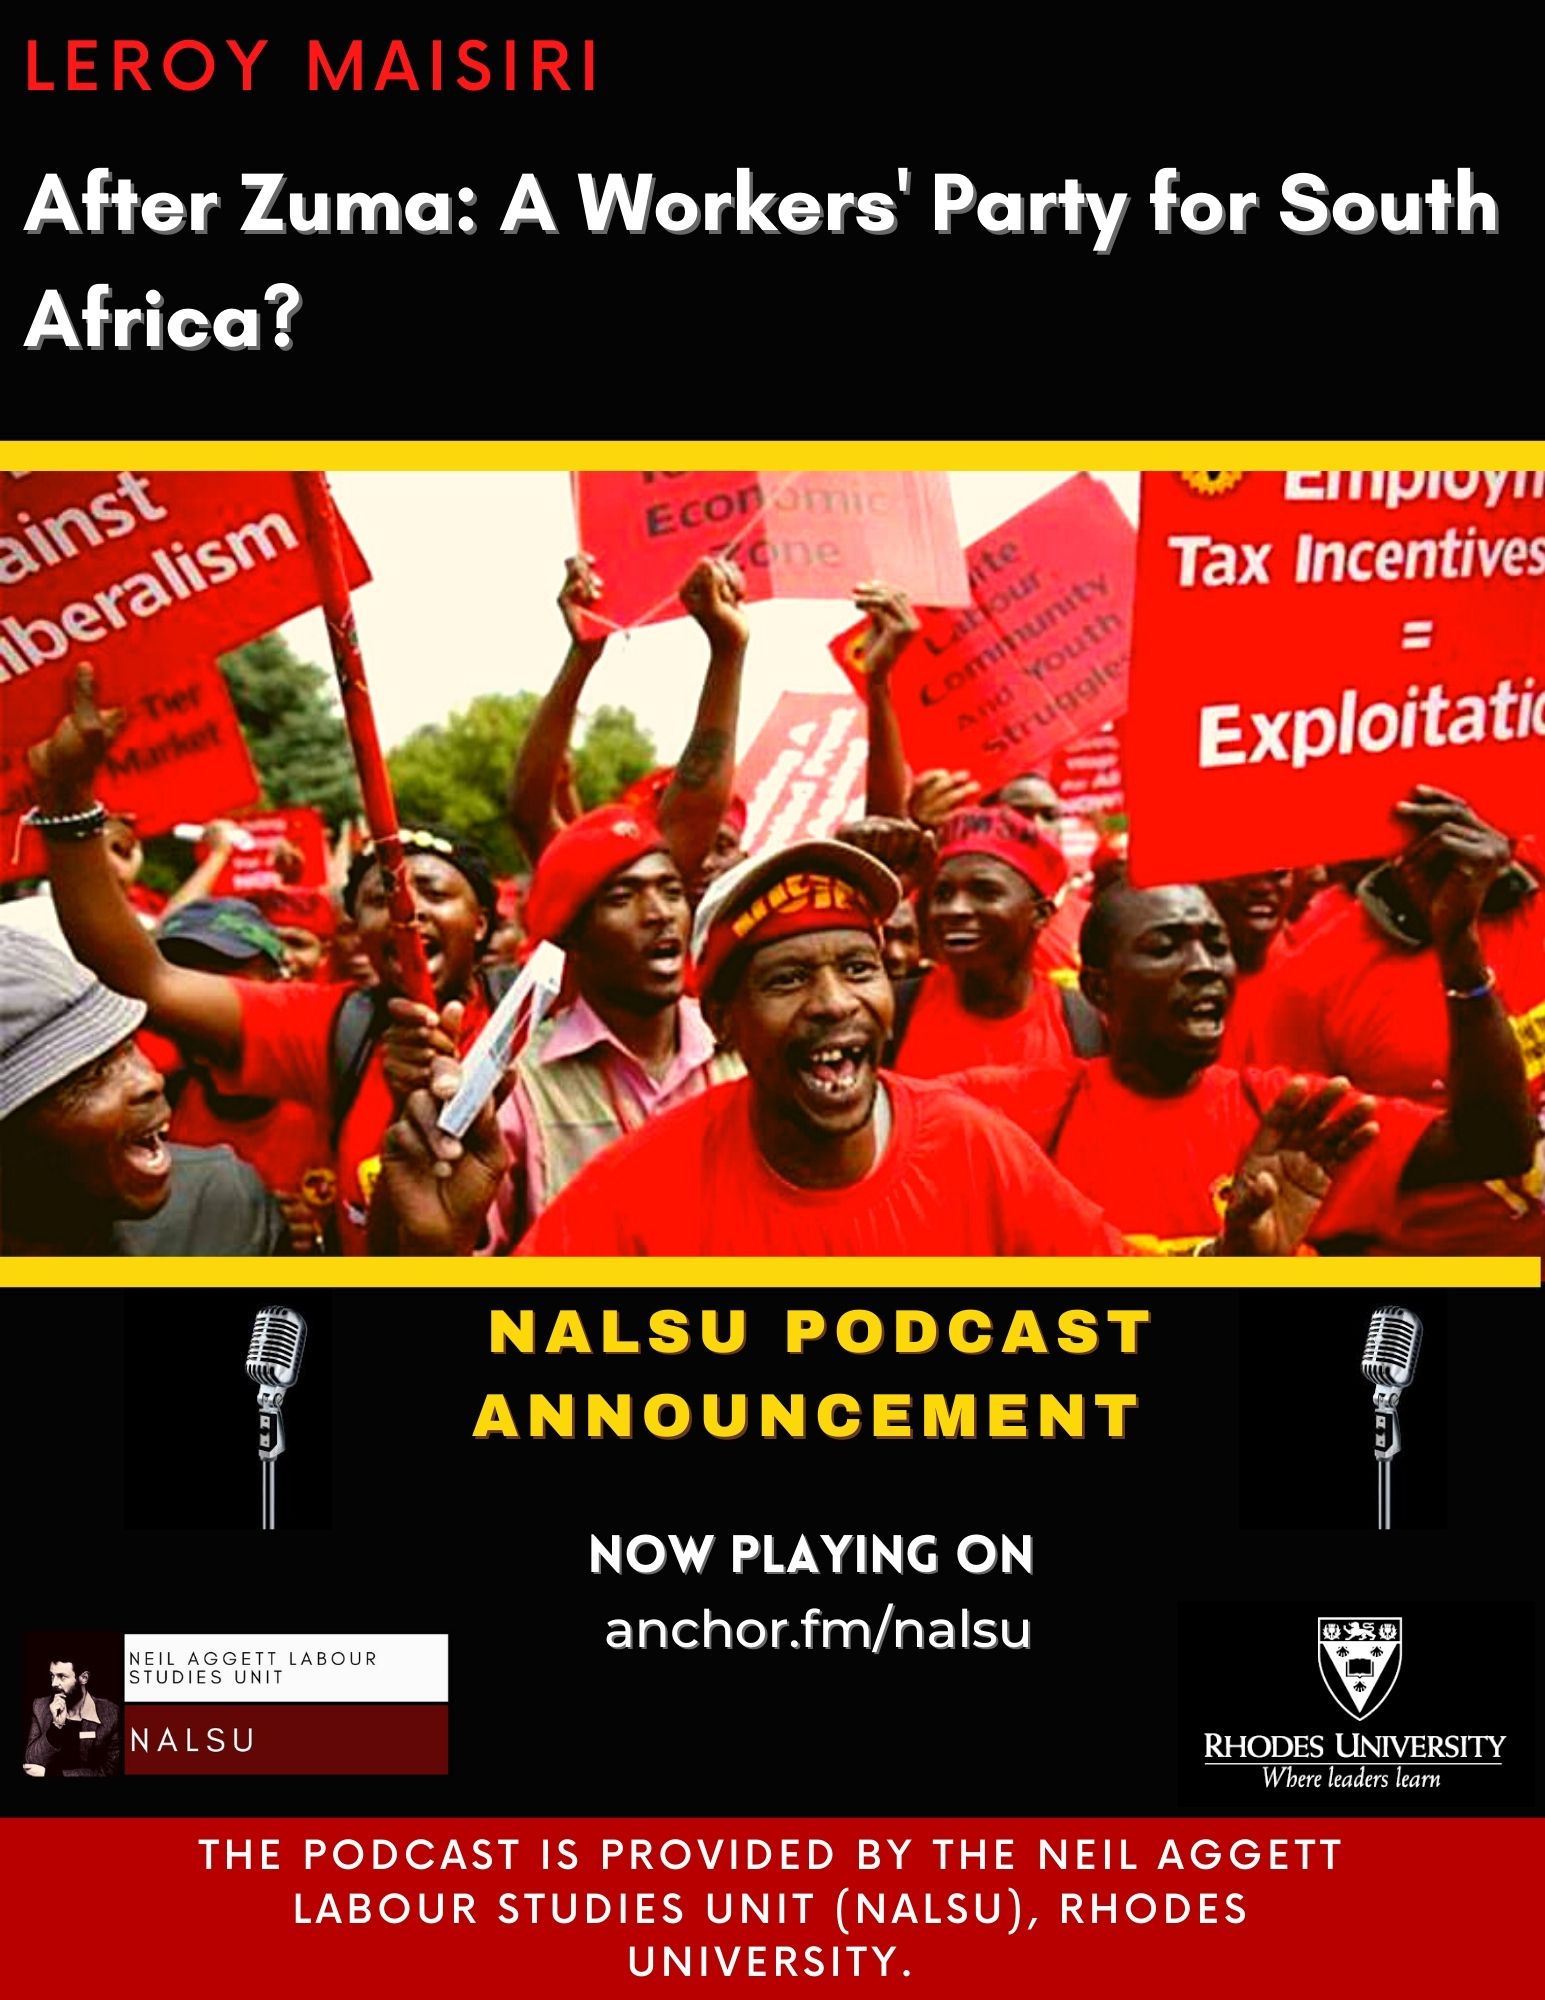 Leroy Maisiri discusses "After Zuma: A Workers' Party for South Africa?"